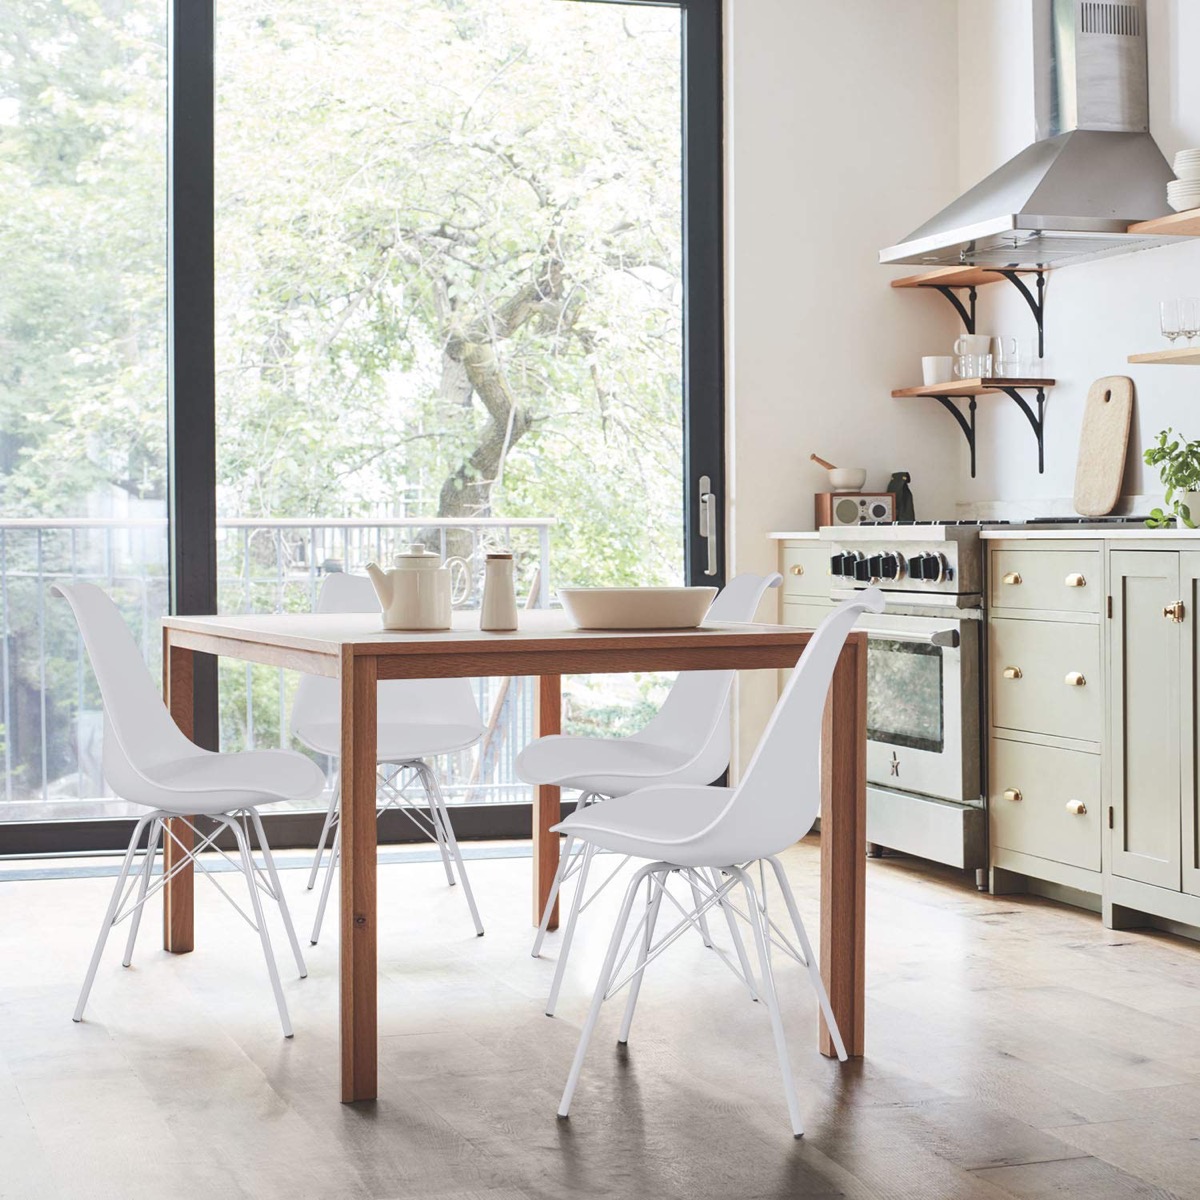 51 Kitchen Chairs To Instantly Update, Leather Kitchen Table Chairs